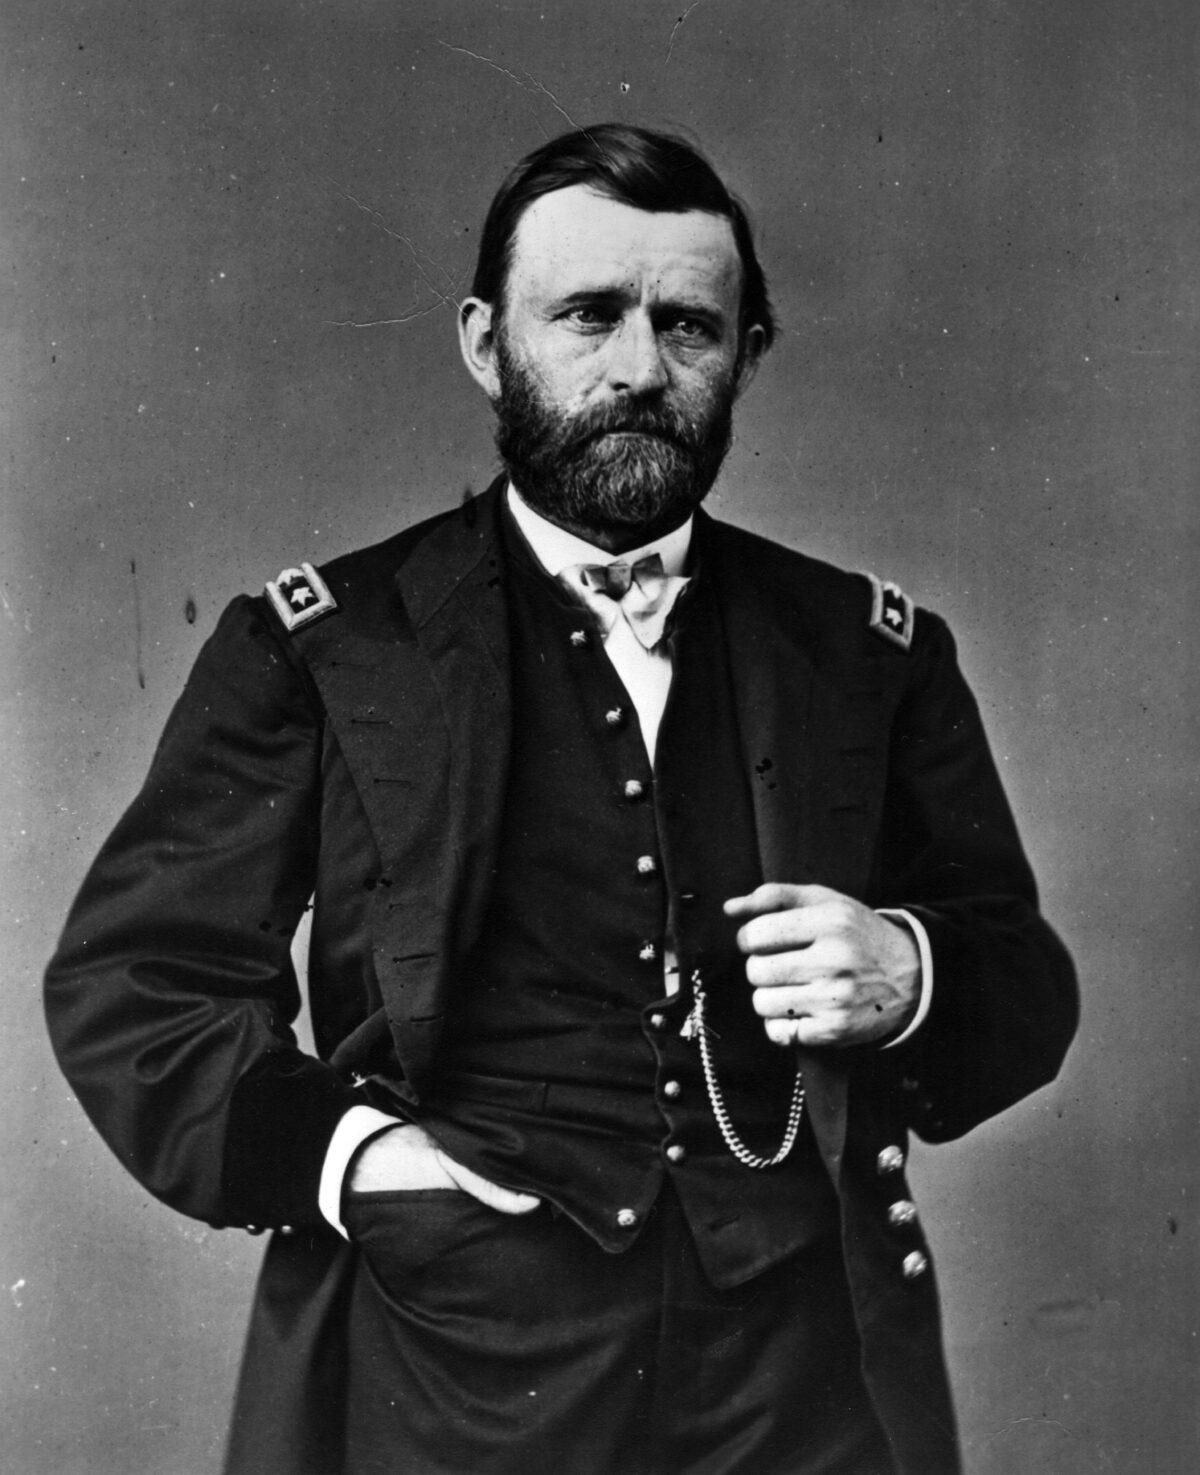 General Ulysses S. Grant in an undated photograph. (Hulton Archive/Getty Images)